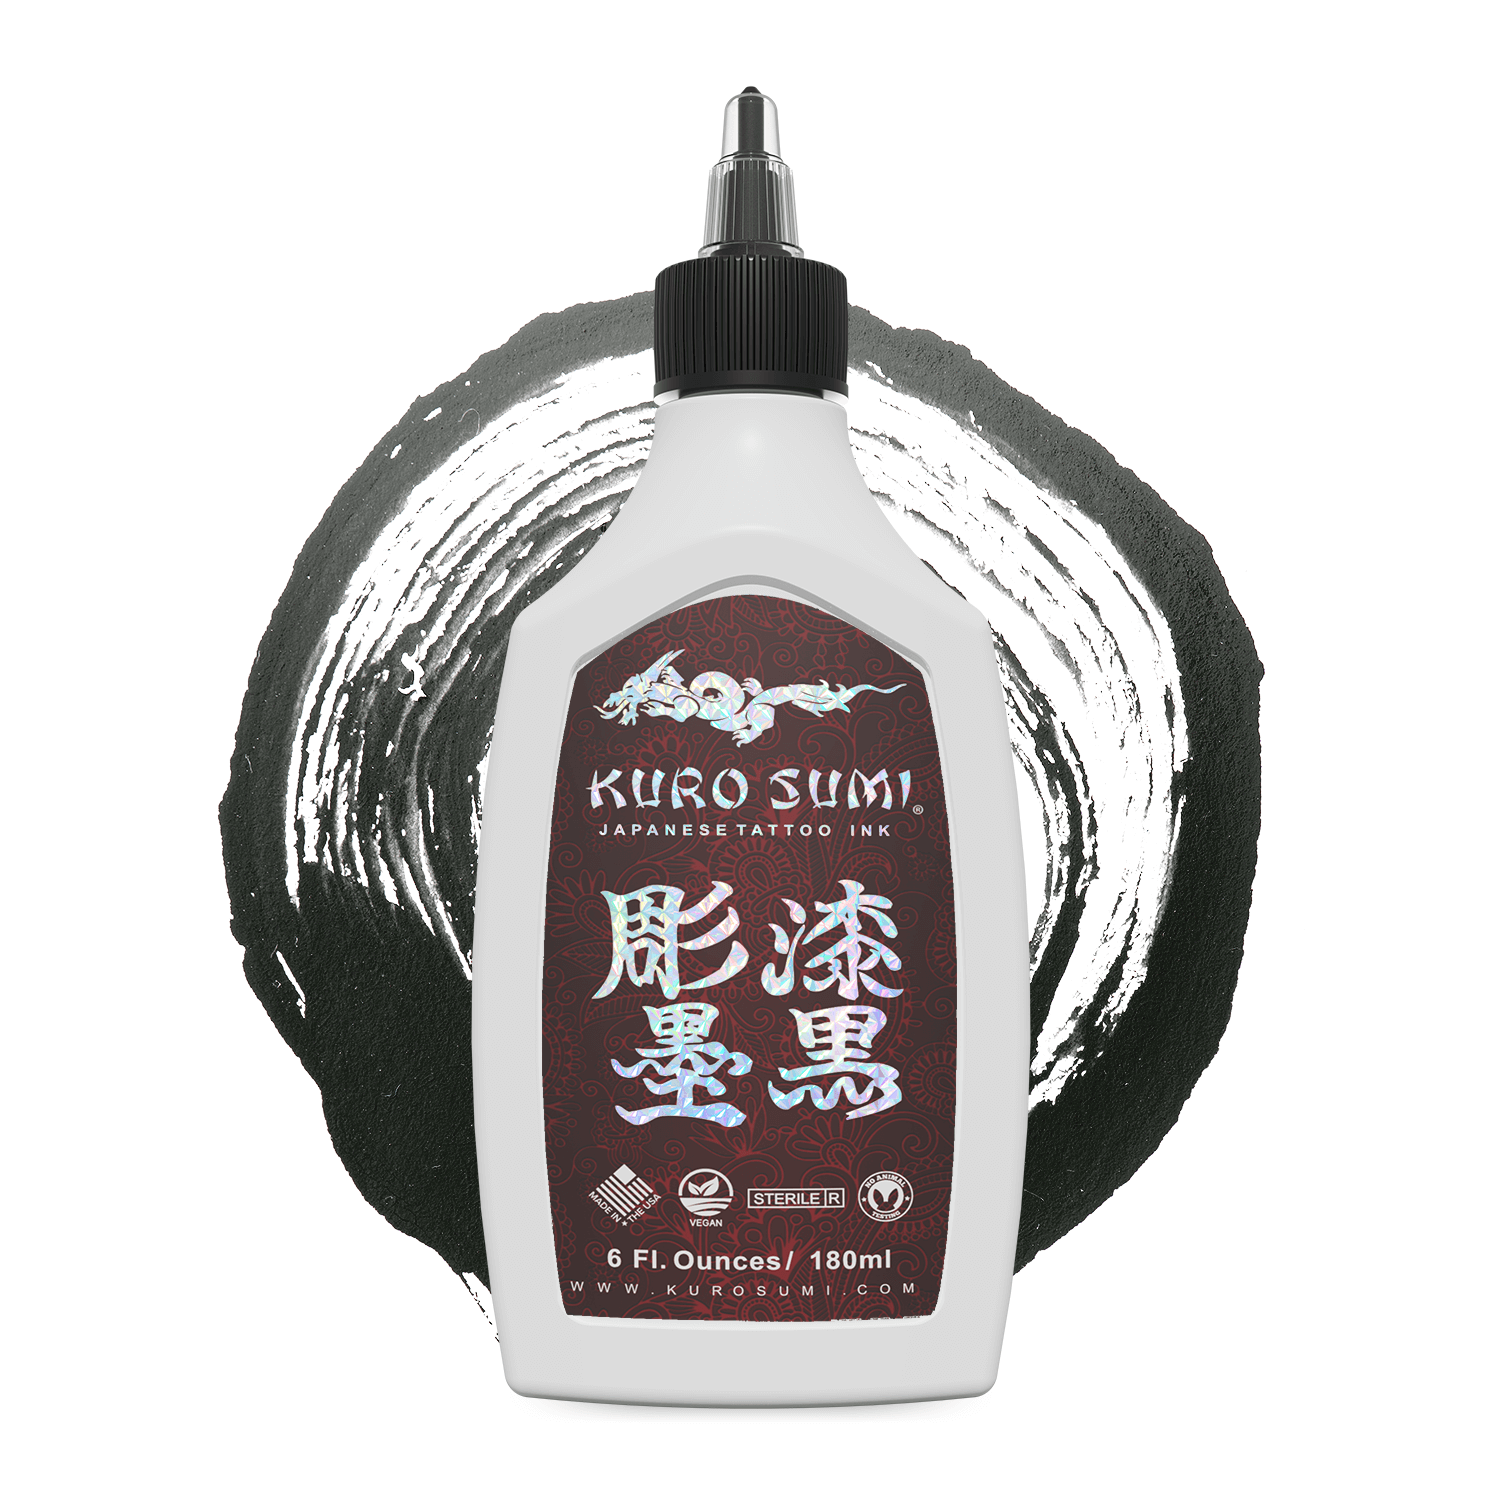  Kuro Sumi Japanese Tattoo Color Ink Pigments, Vegan  Professional Tattooing Inks, Black Cherry Shading, 6 Ounce : Beauty &  Personal Care